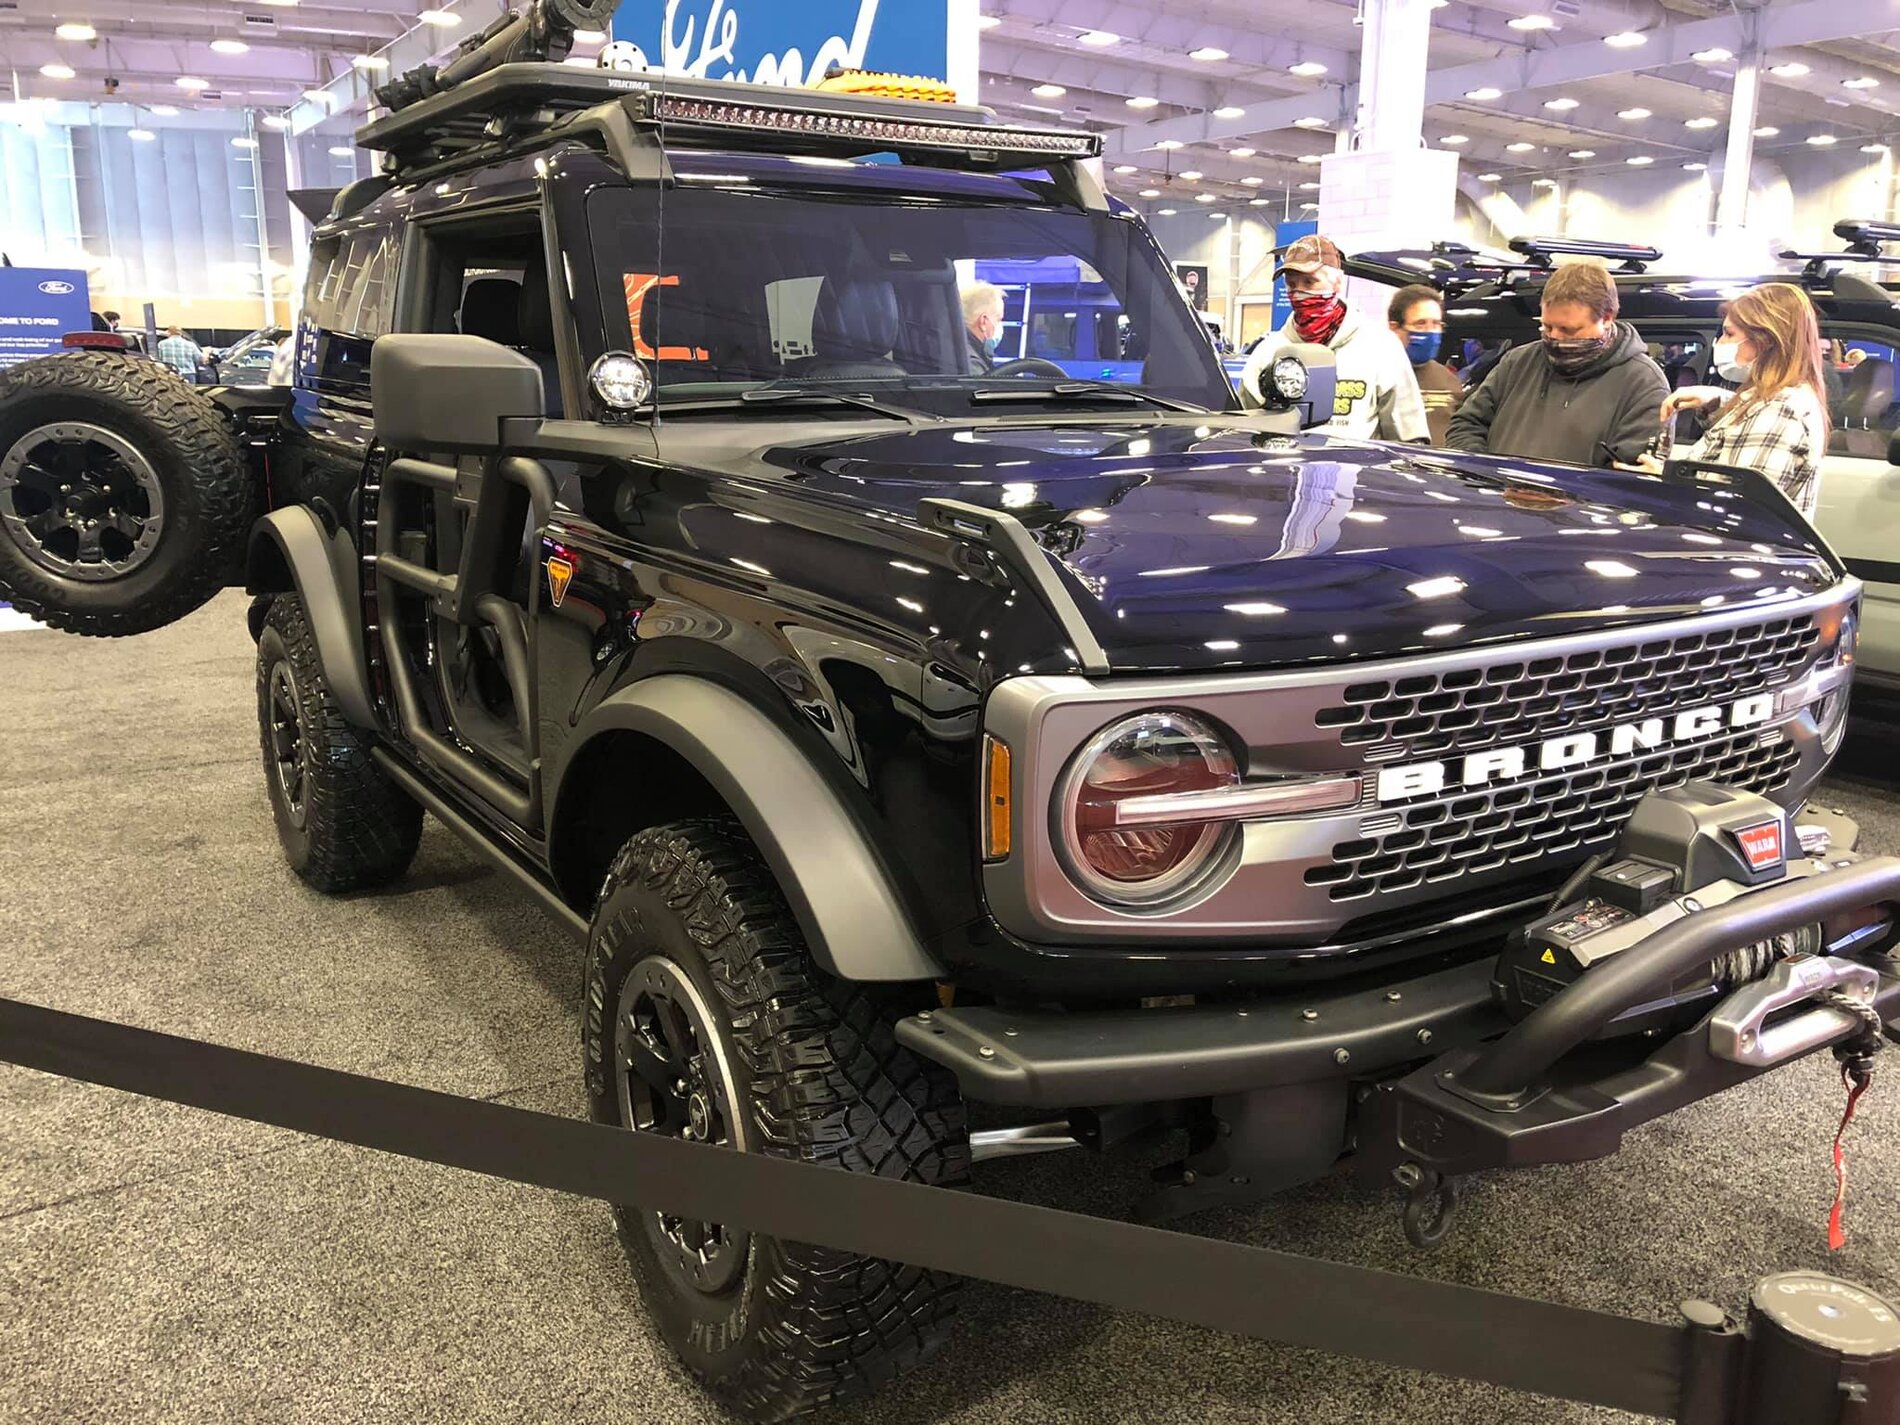 Ford Bronco Pics & Videos From OKC Show: 2-Door Trail Concept and Overland Concept Broncos 157545302_10224037713223352_3594394310143637439_o